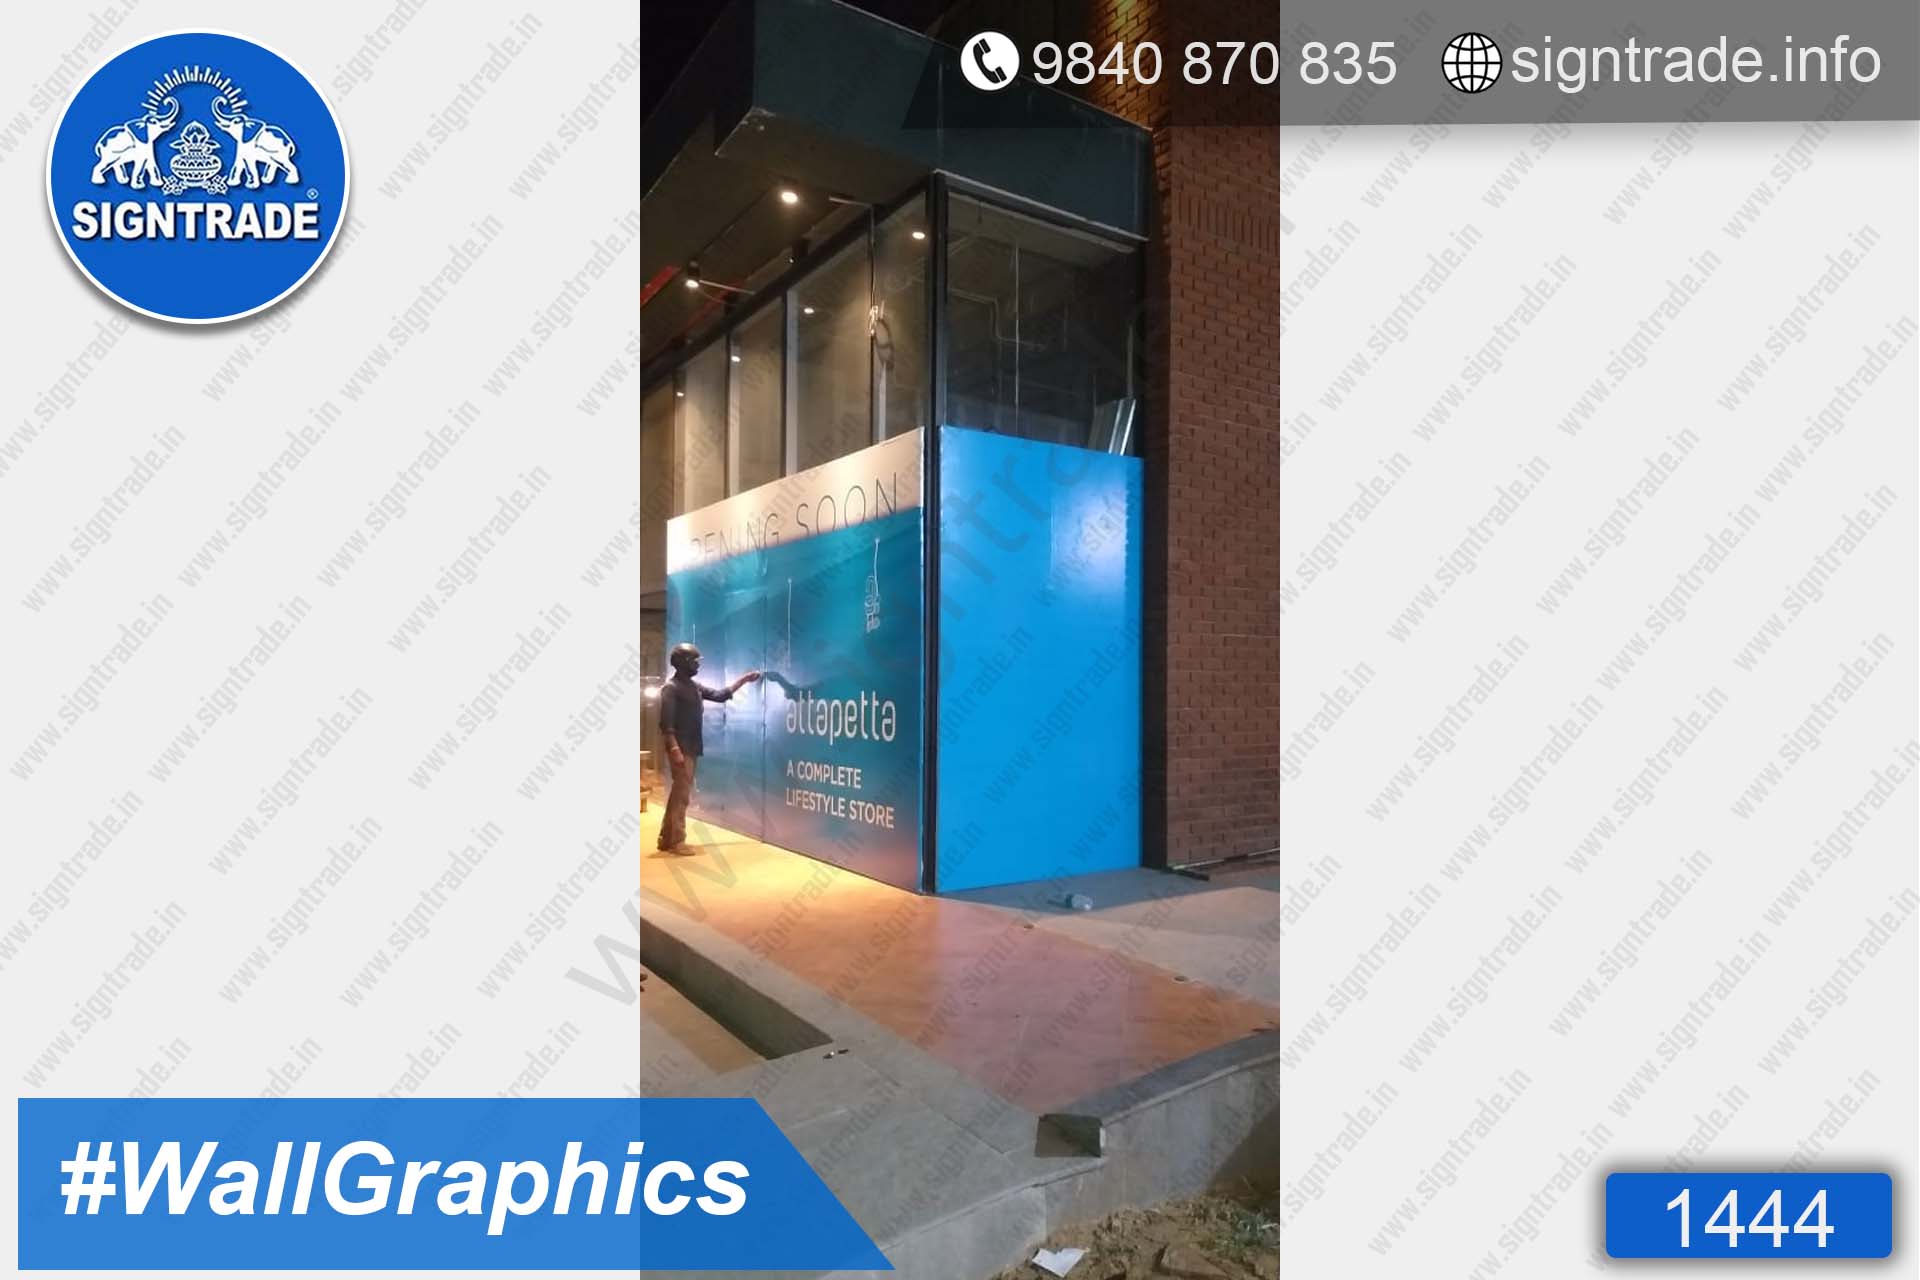 Attapetta - 1444, Vinyl Graphics, Wall Graphics, Wall Wrapping, wall stickers, wall Wraps, Wall Branding